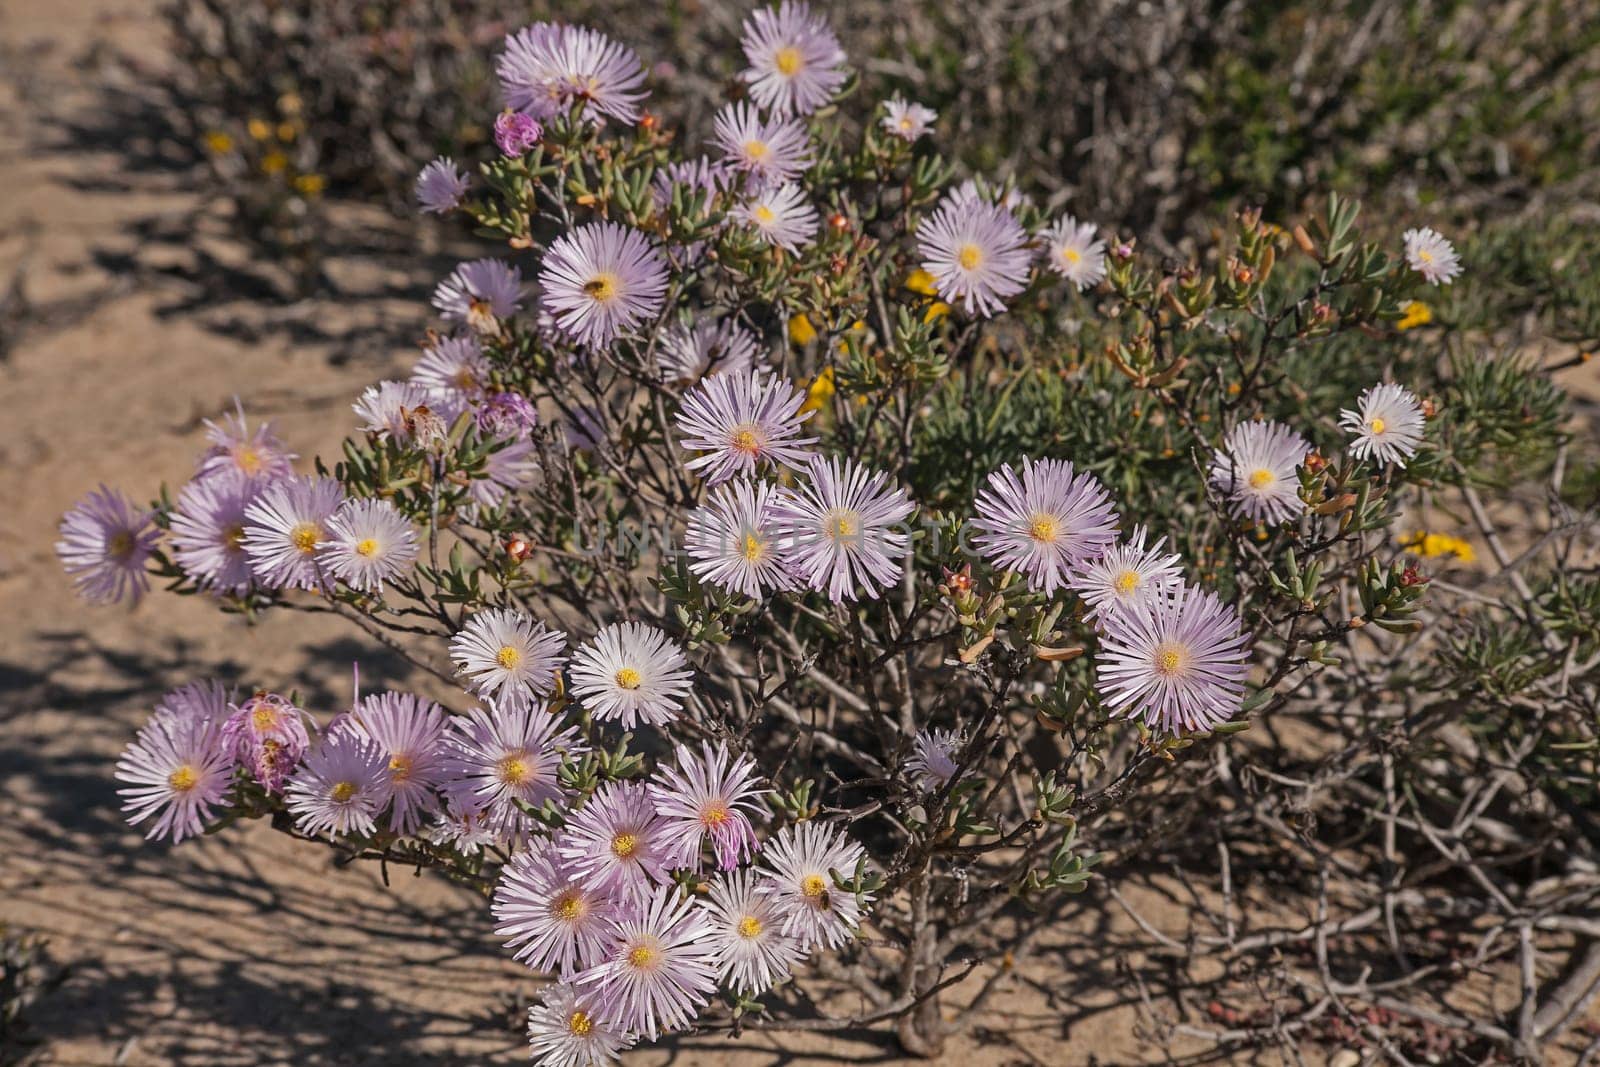 Bright spring flowers of the Laprantus species in the Namaqua National Park. South Africa